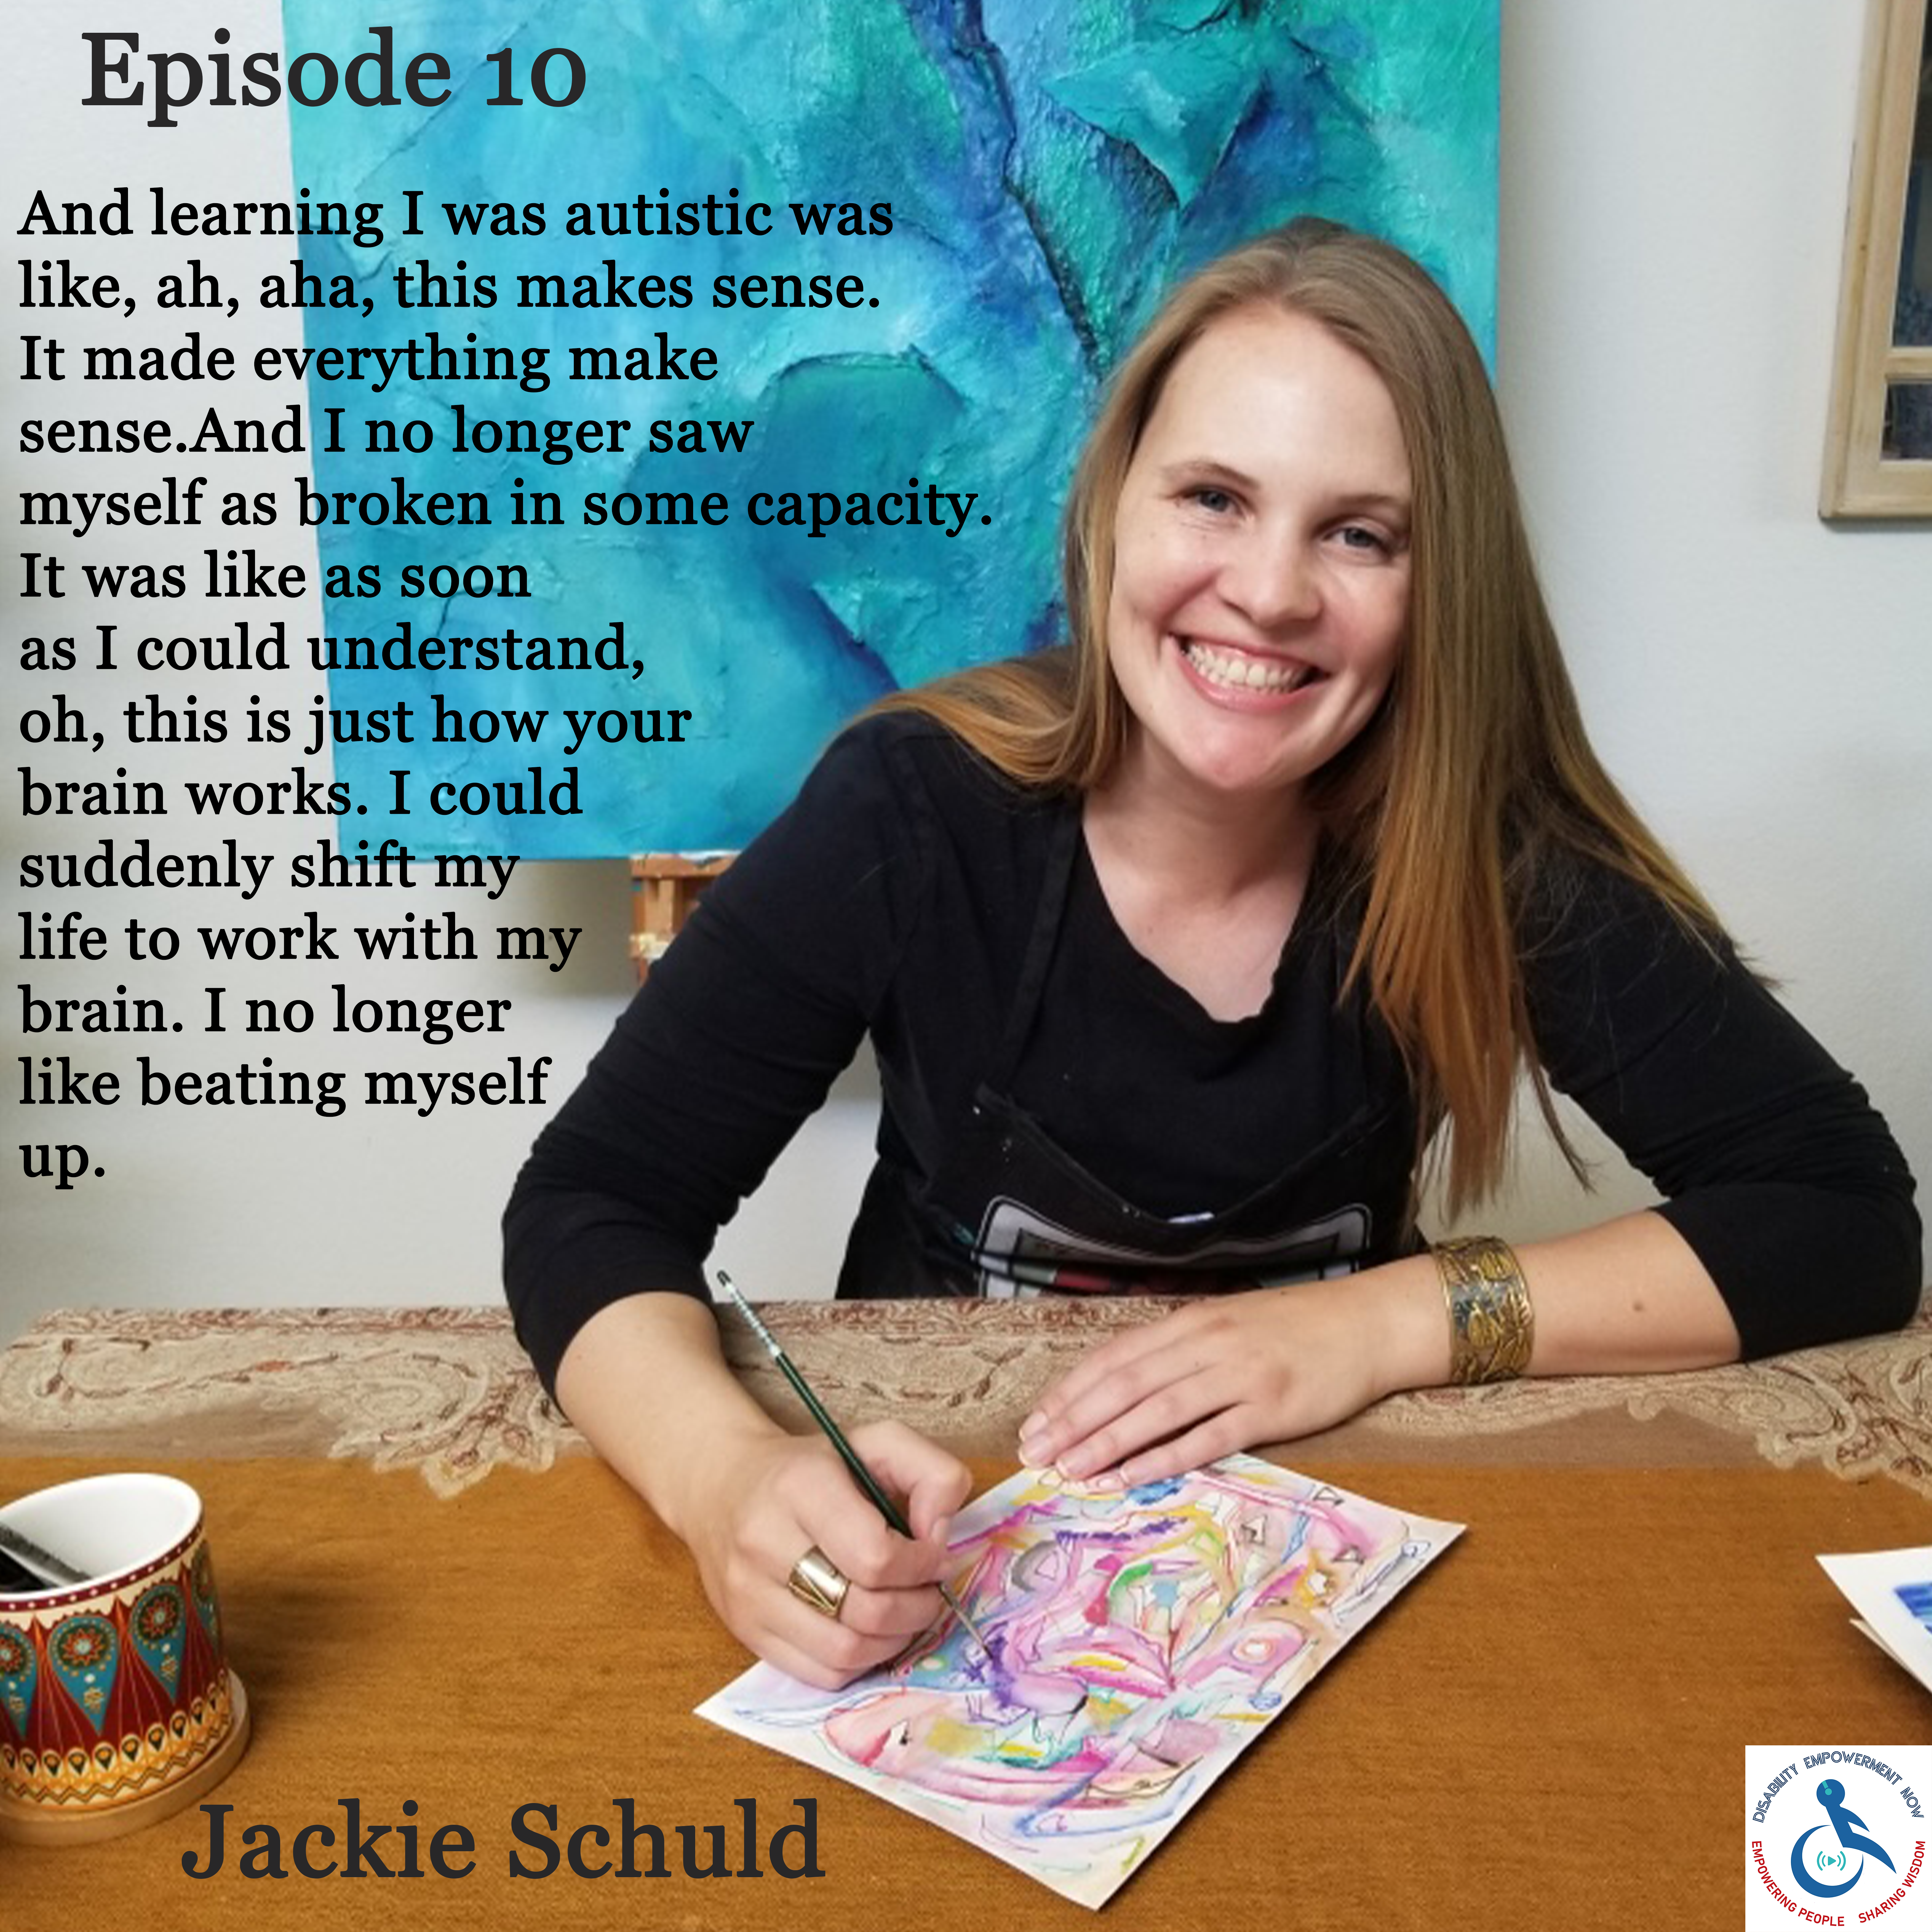 S2 Episode 10 with Jackie Schuld